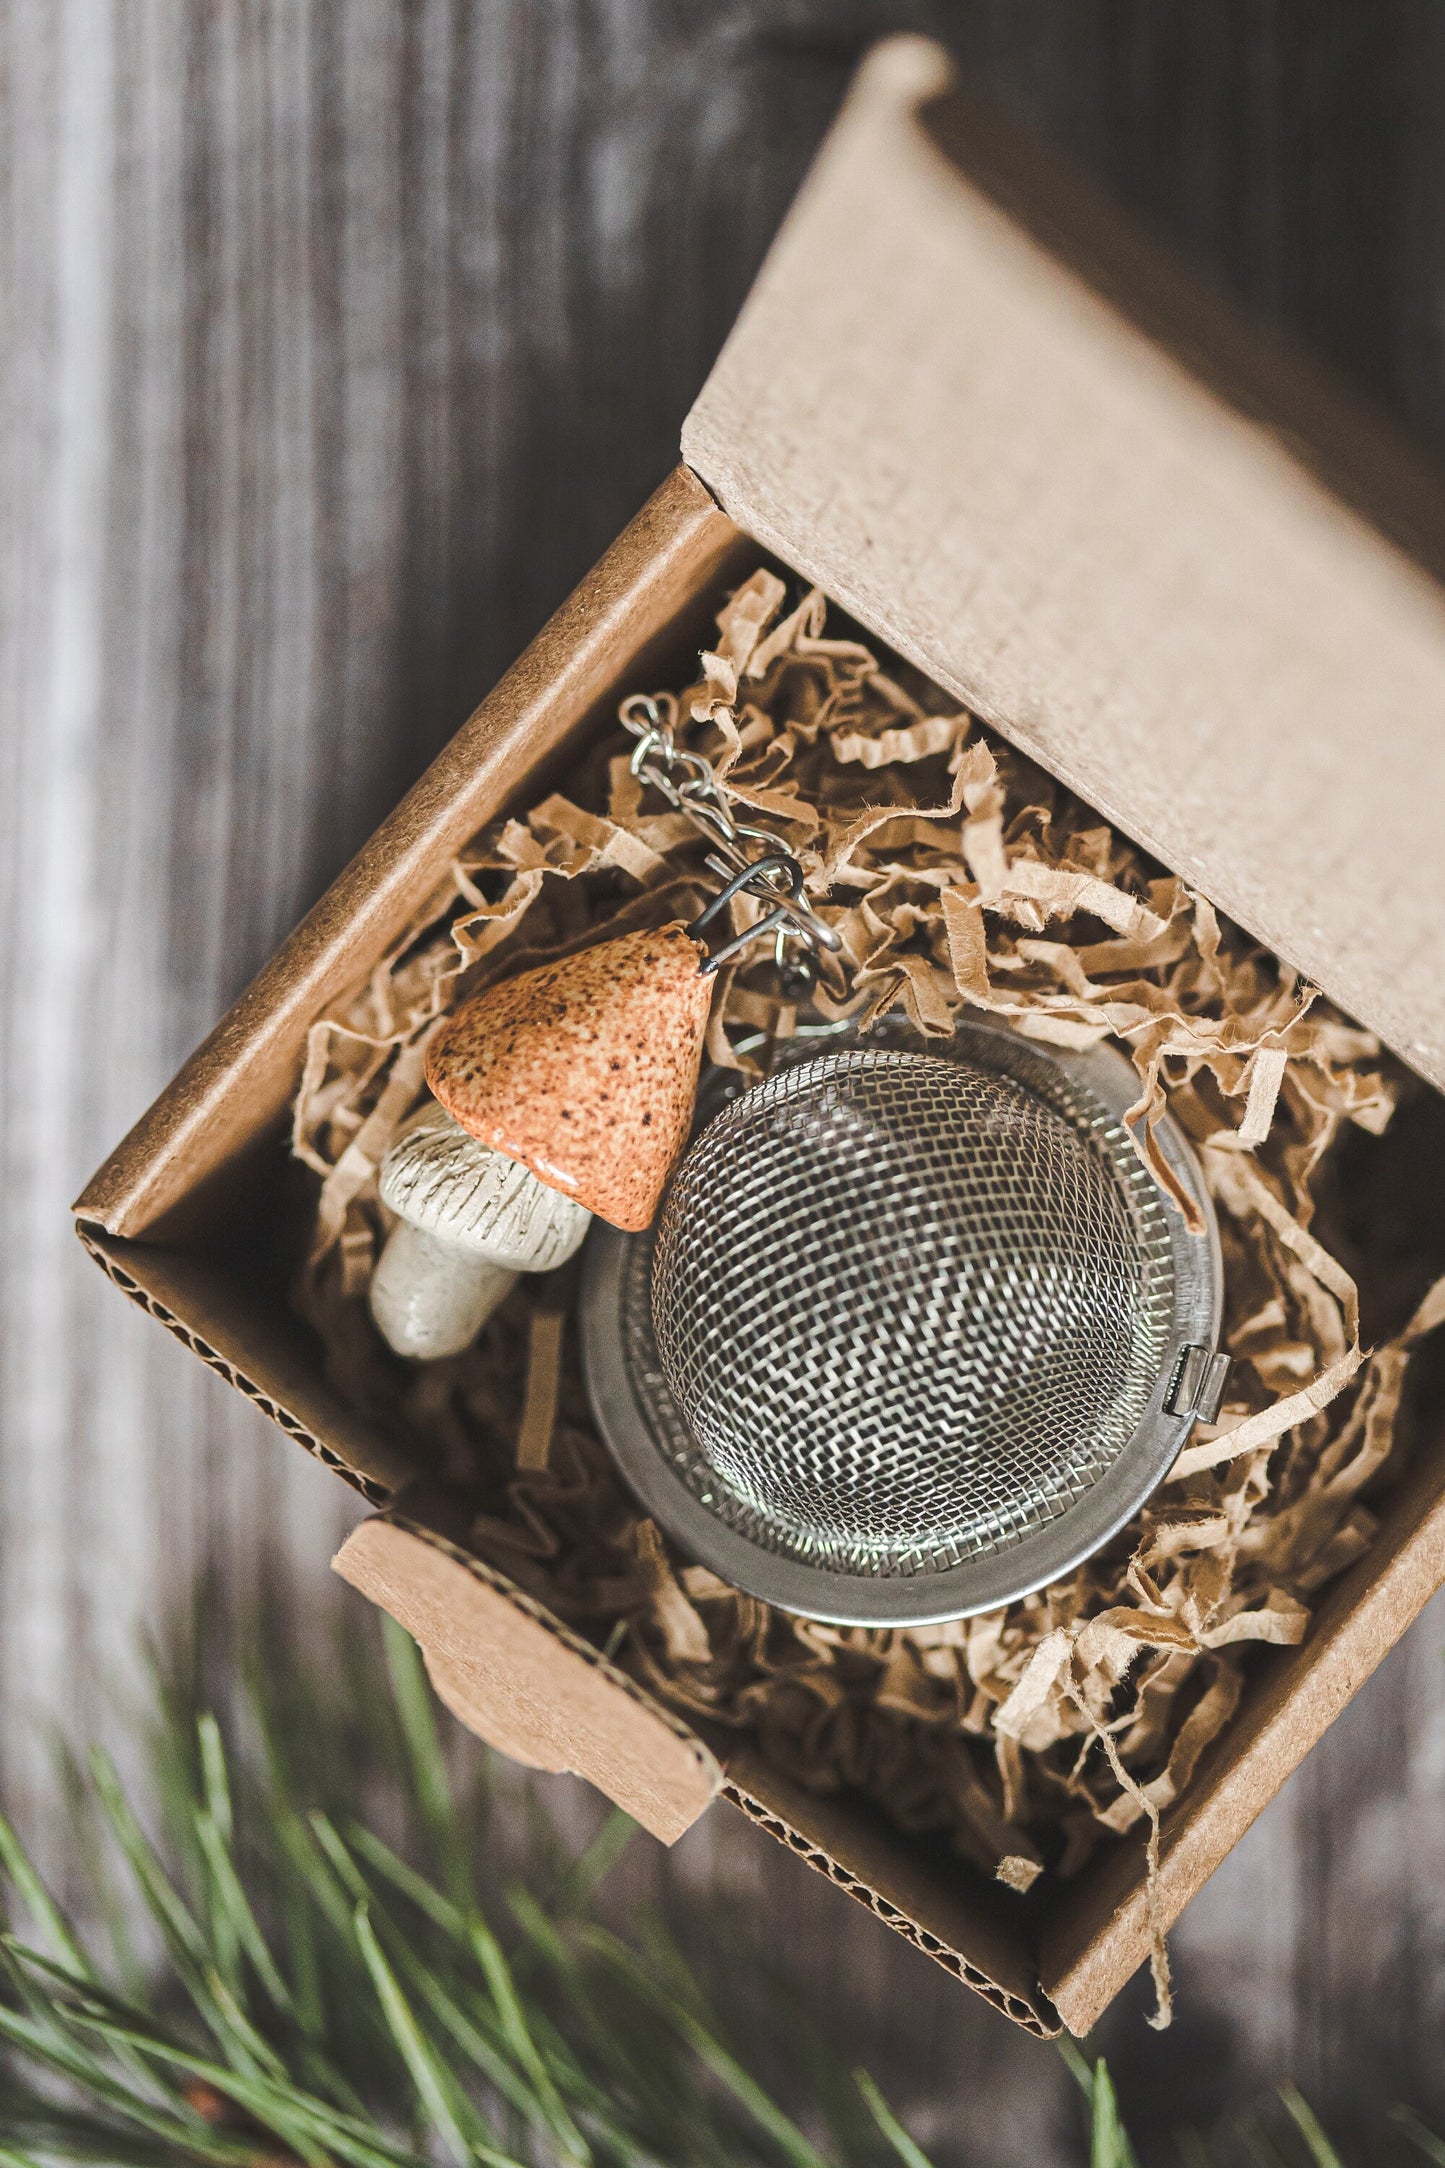 Loose leaf tea strainer with yellowish swamp mushroom - Mother's day gift - Herbal tea infuser with ceramic charm - Christmas gift